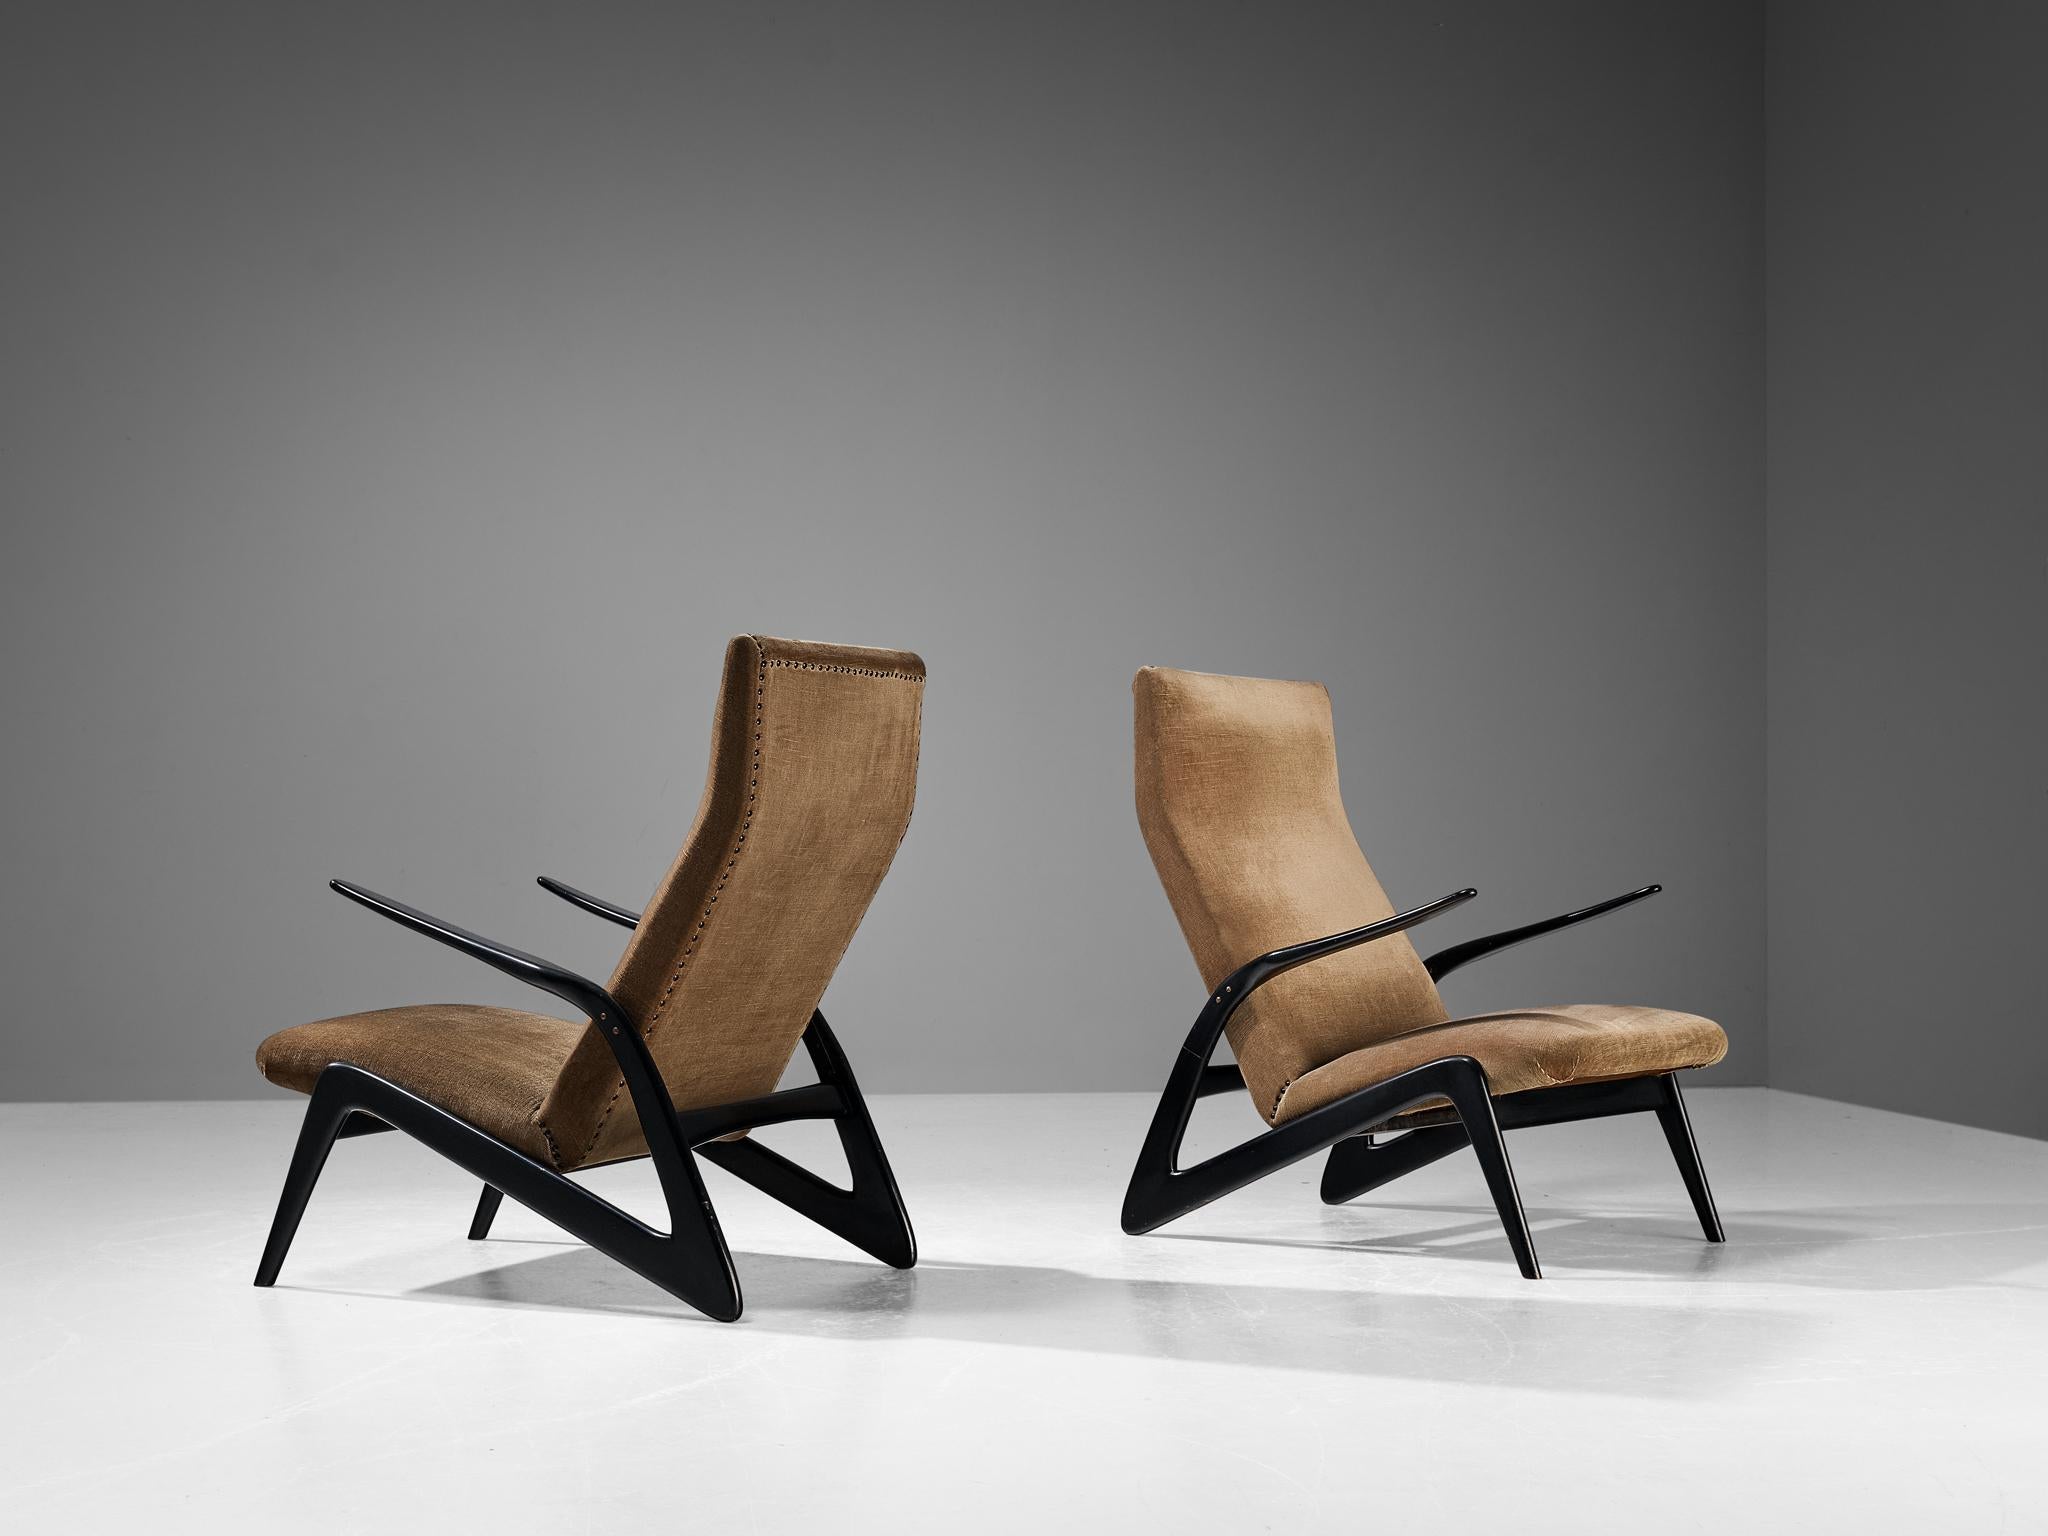 Alfred Hendrickx for Belform, pair of lounge chairs, blackened wood, fabric, Belgium, circa 1955

A sophisticated pair of lounge chairs by the Belgian designer Alfred Hendrickx produced by Belform. This design definitely shows the hand of the